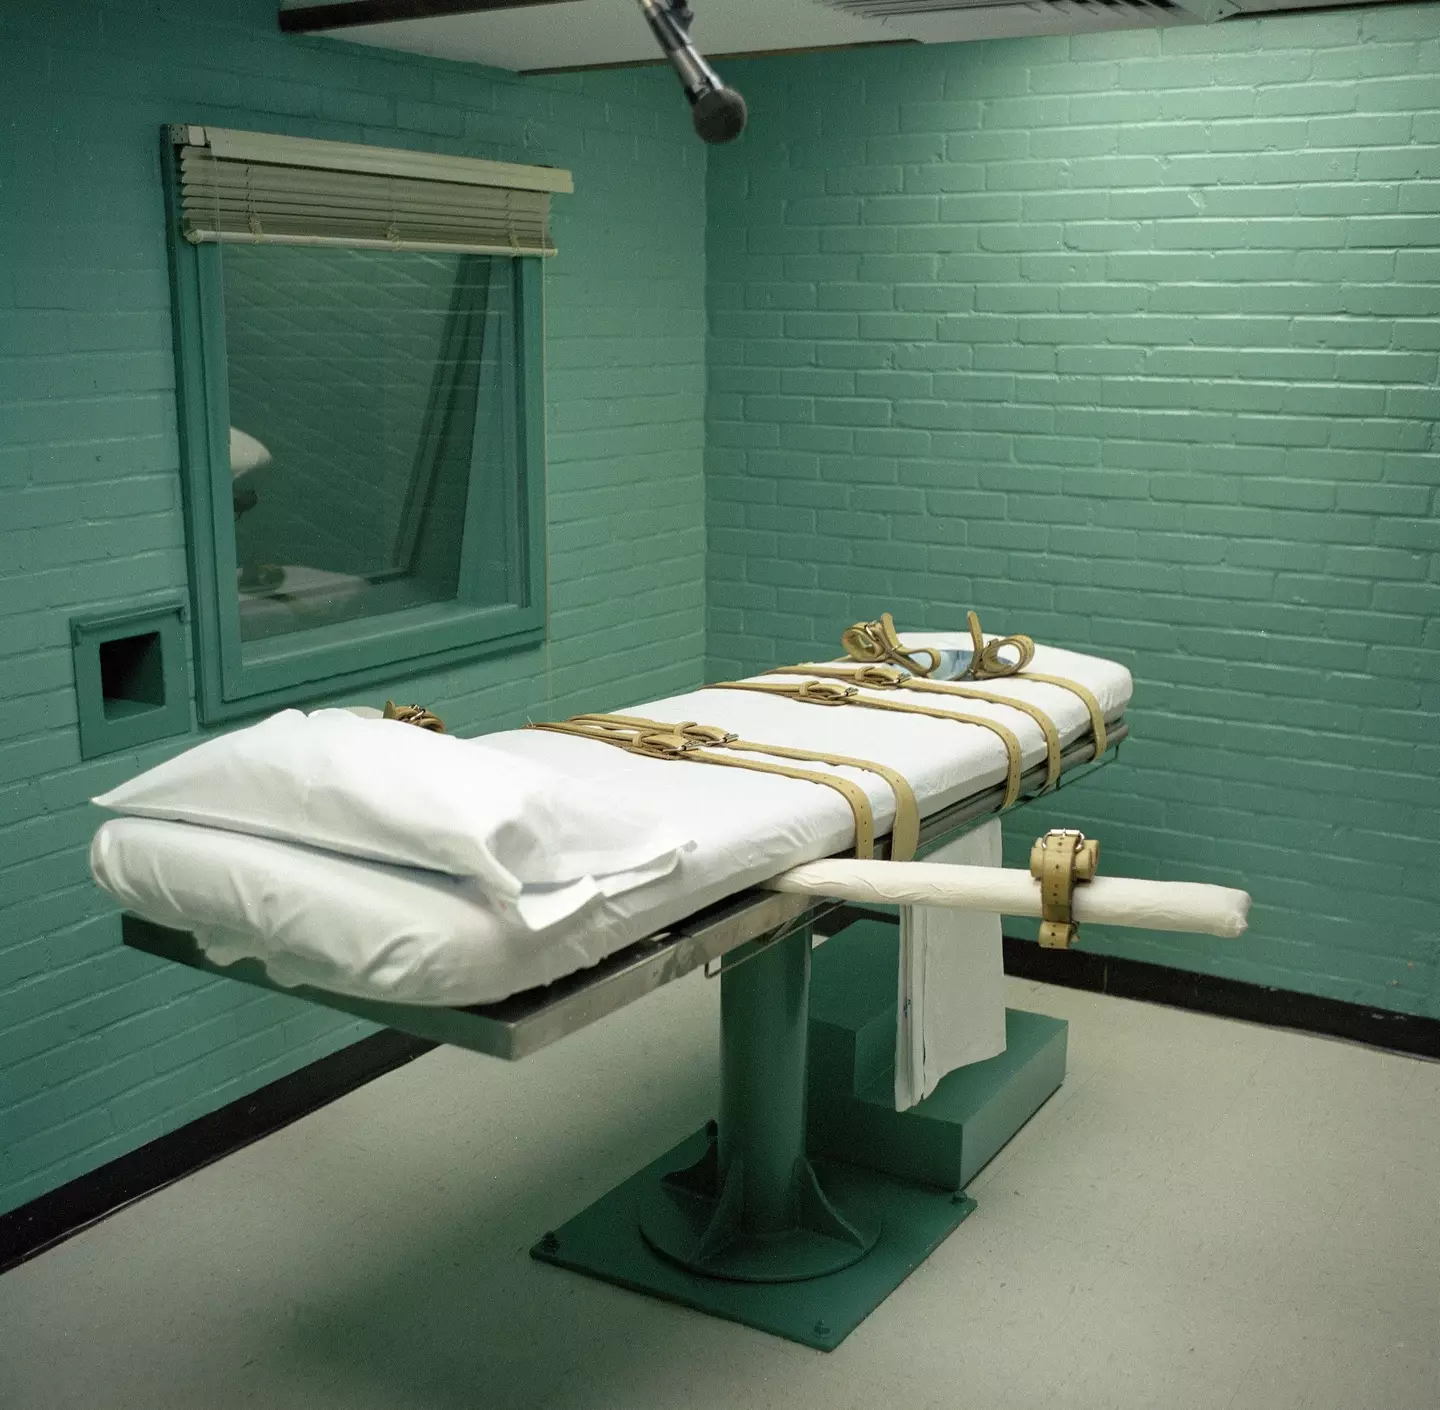 The convicted killer was supposed to be put to death in November 2022, but the execution was botched and he survived.